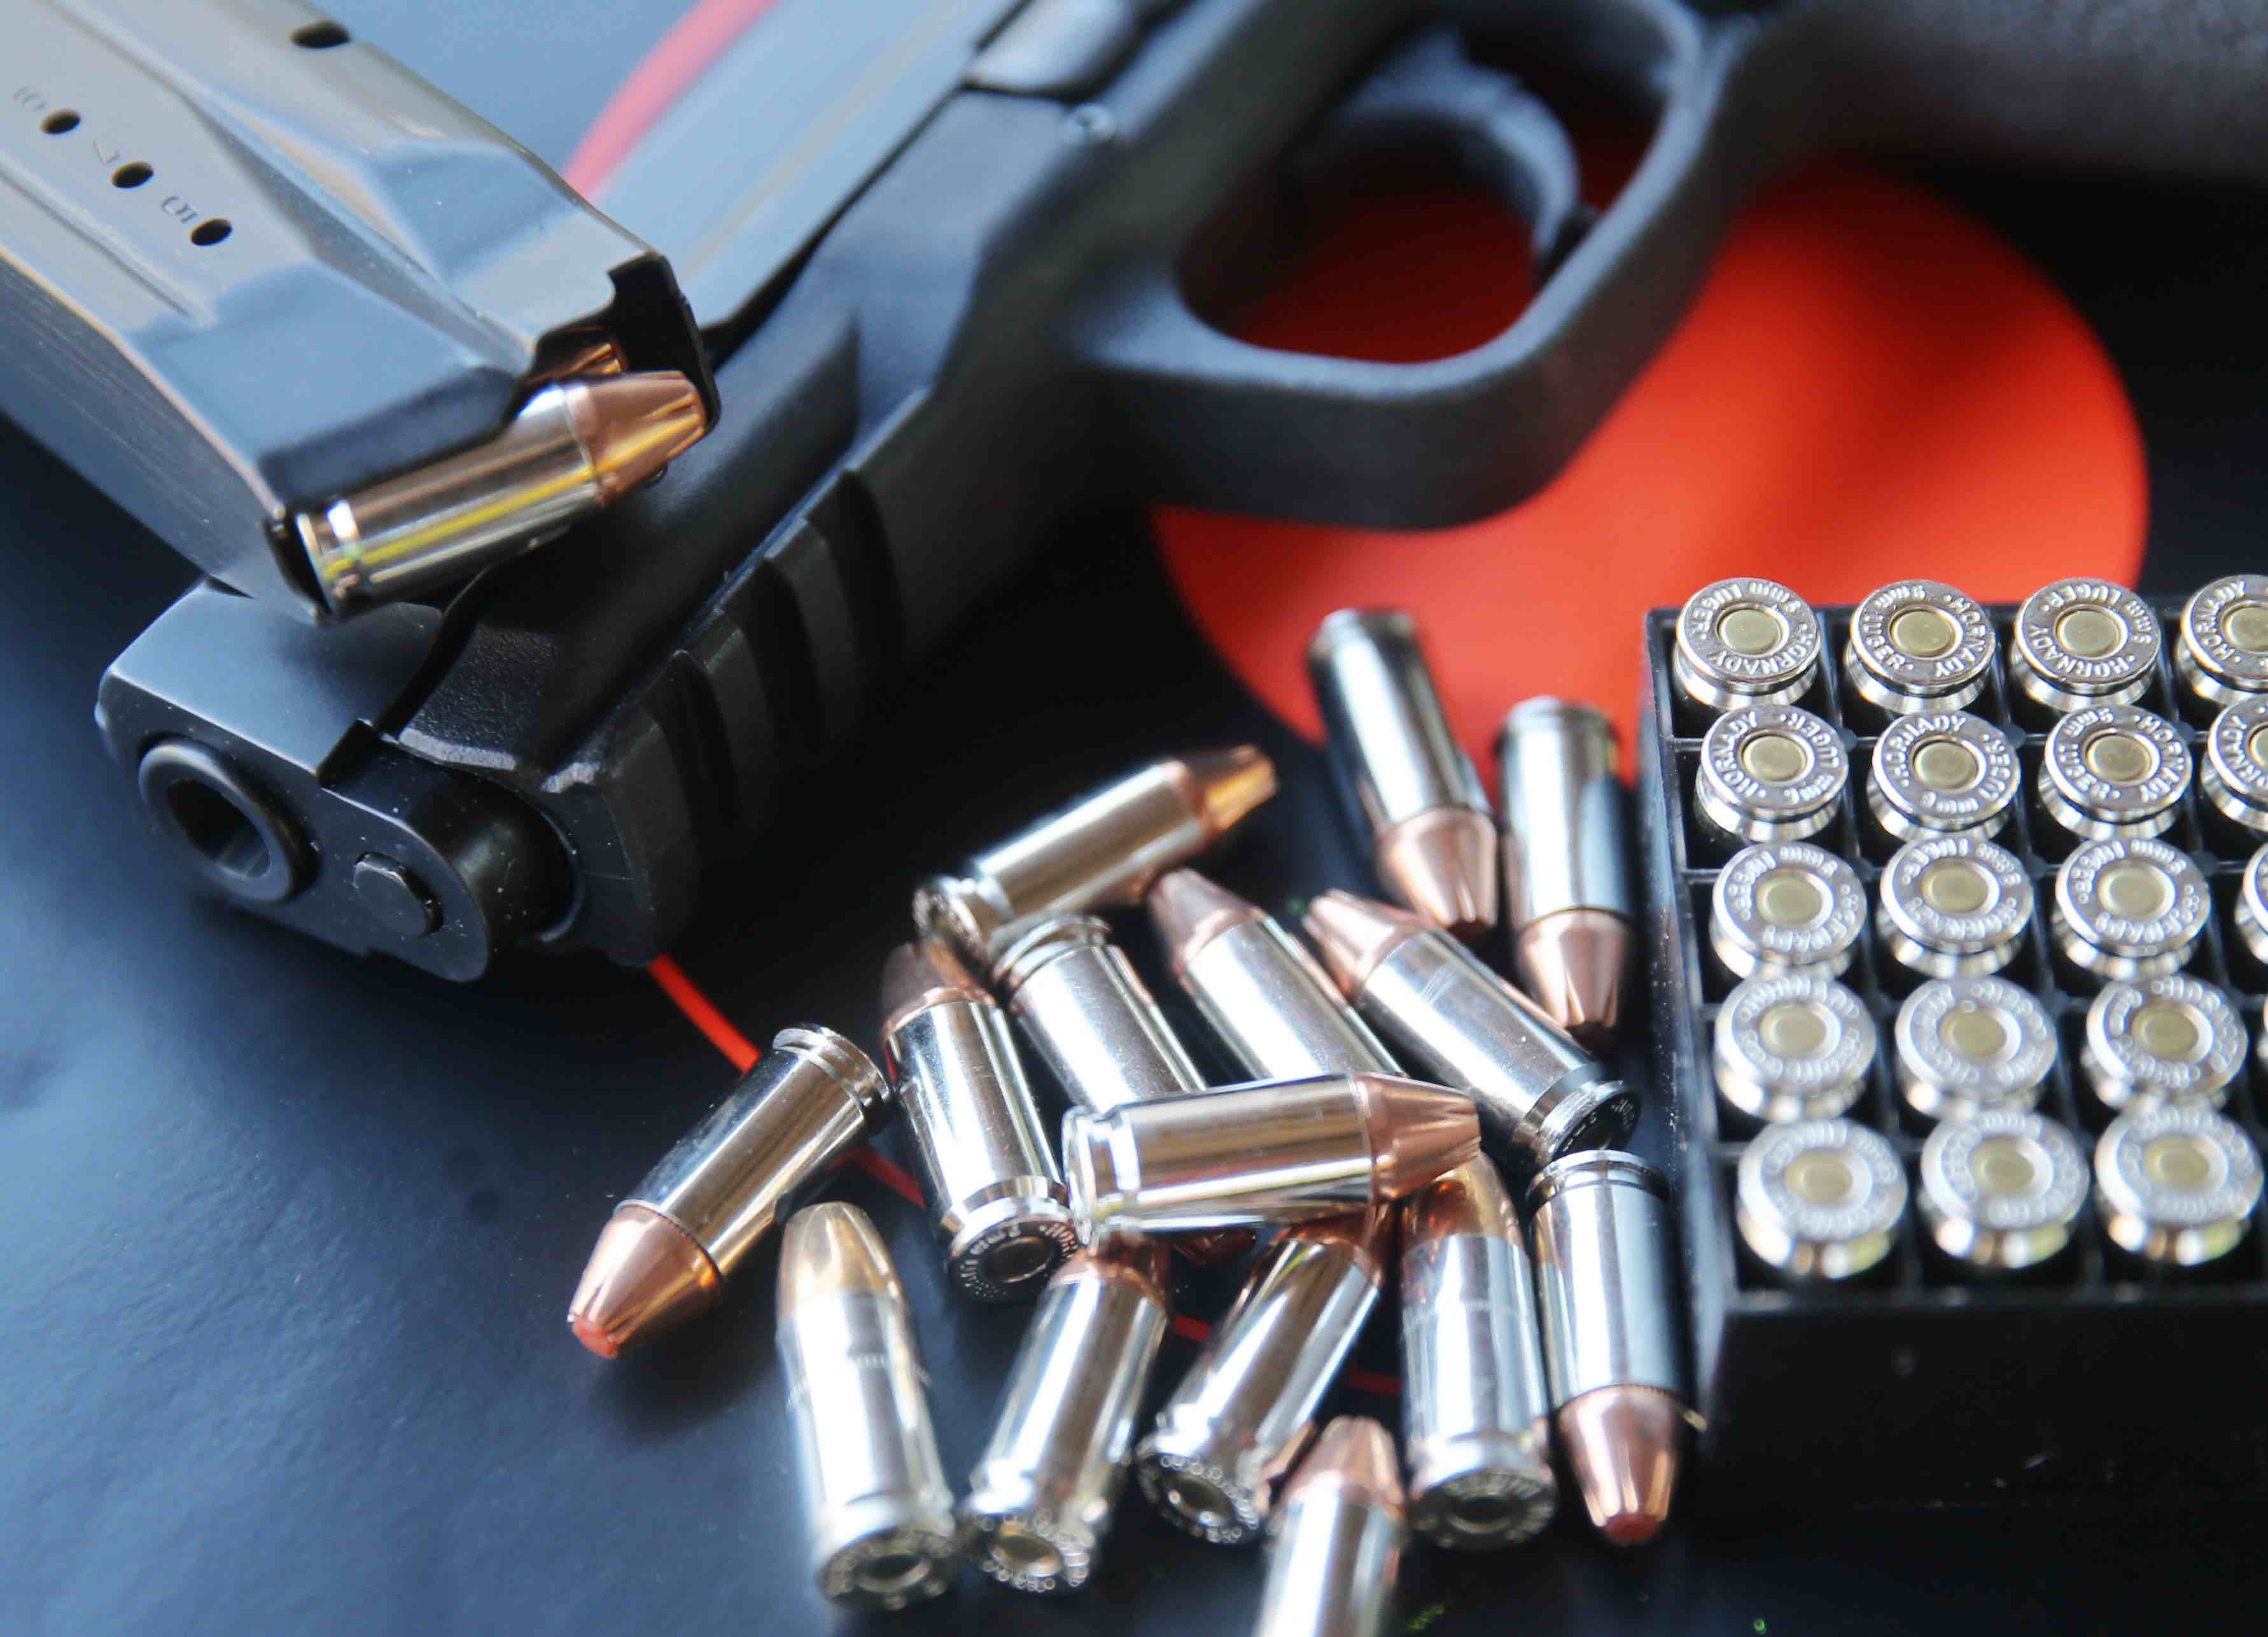 Pros and Cons of the Popular 9mm